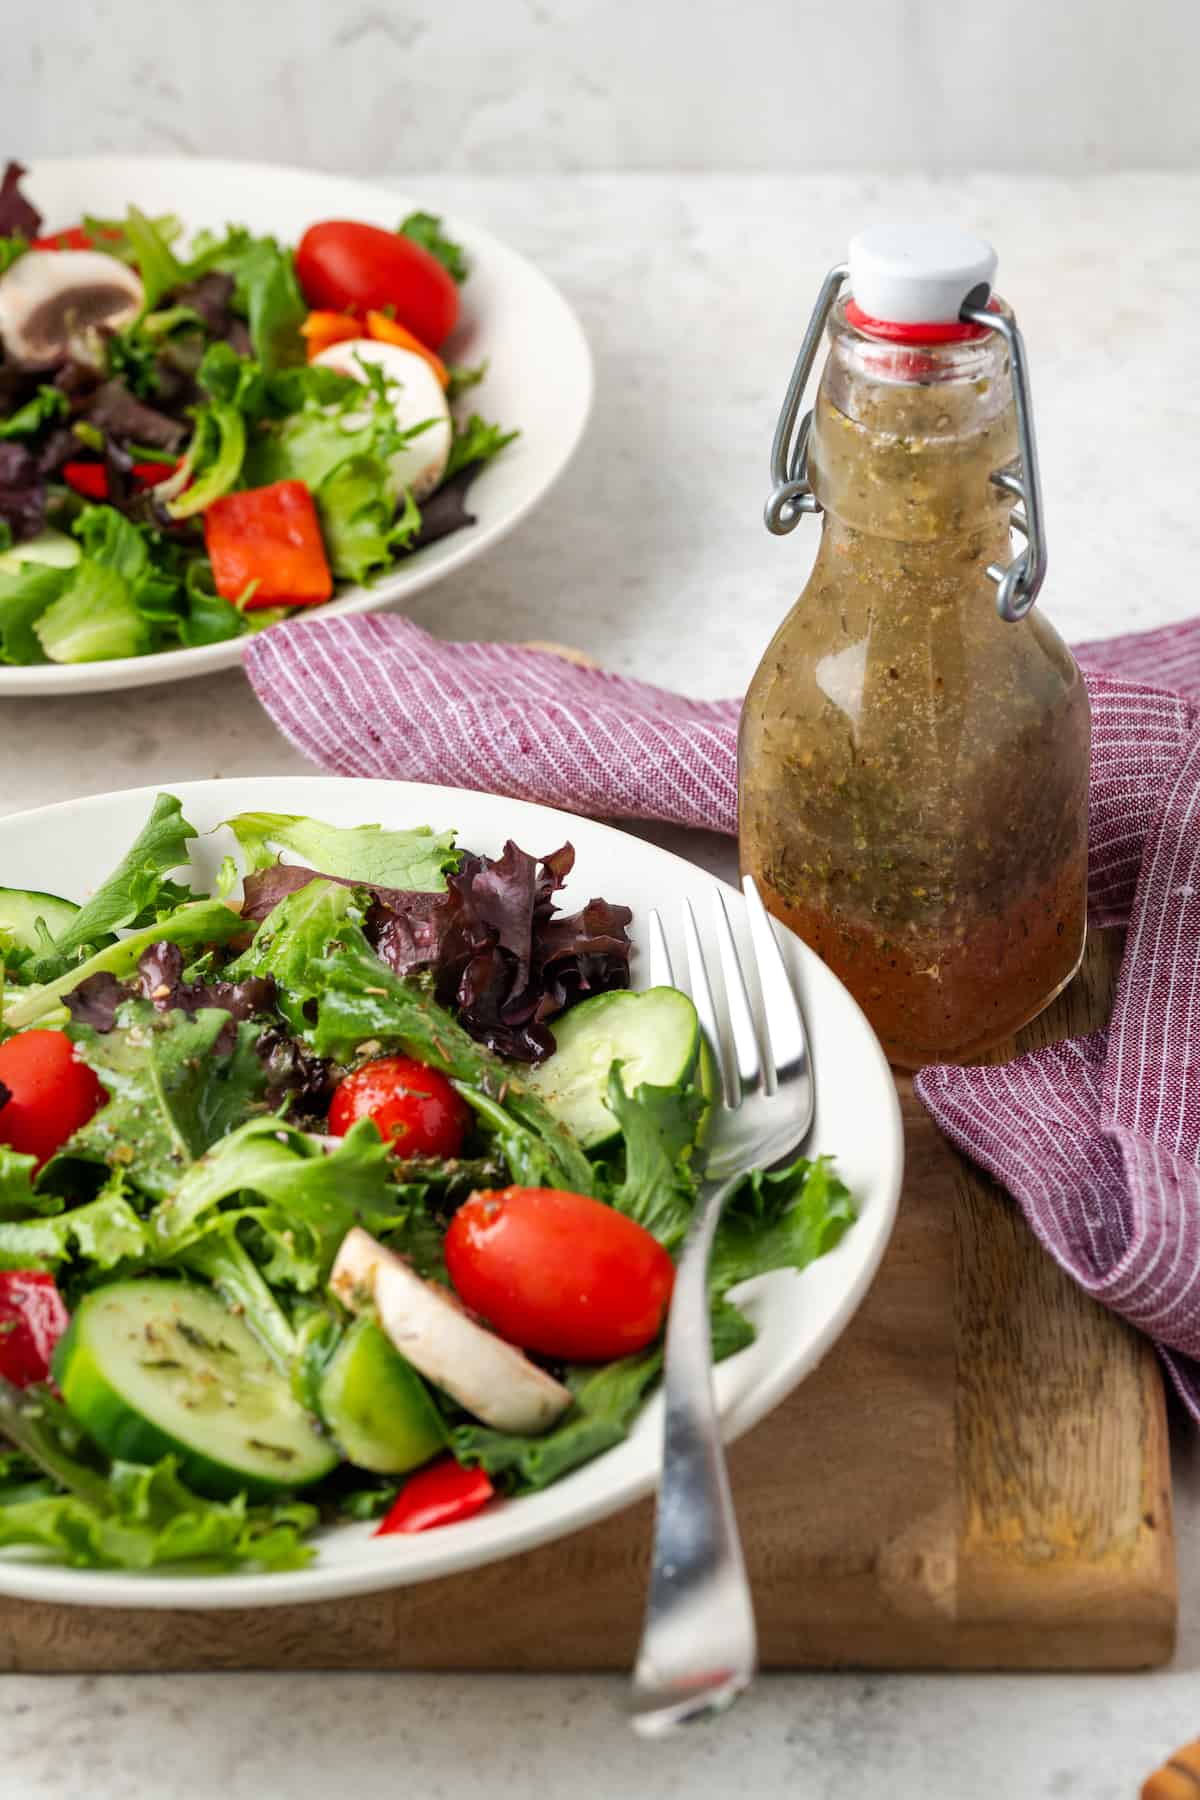 A jar of homemade salad dressing beside a bowl of salad set on a wooden cutting board.